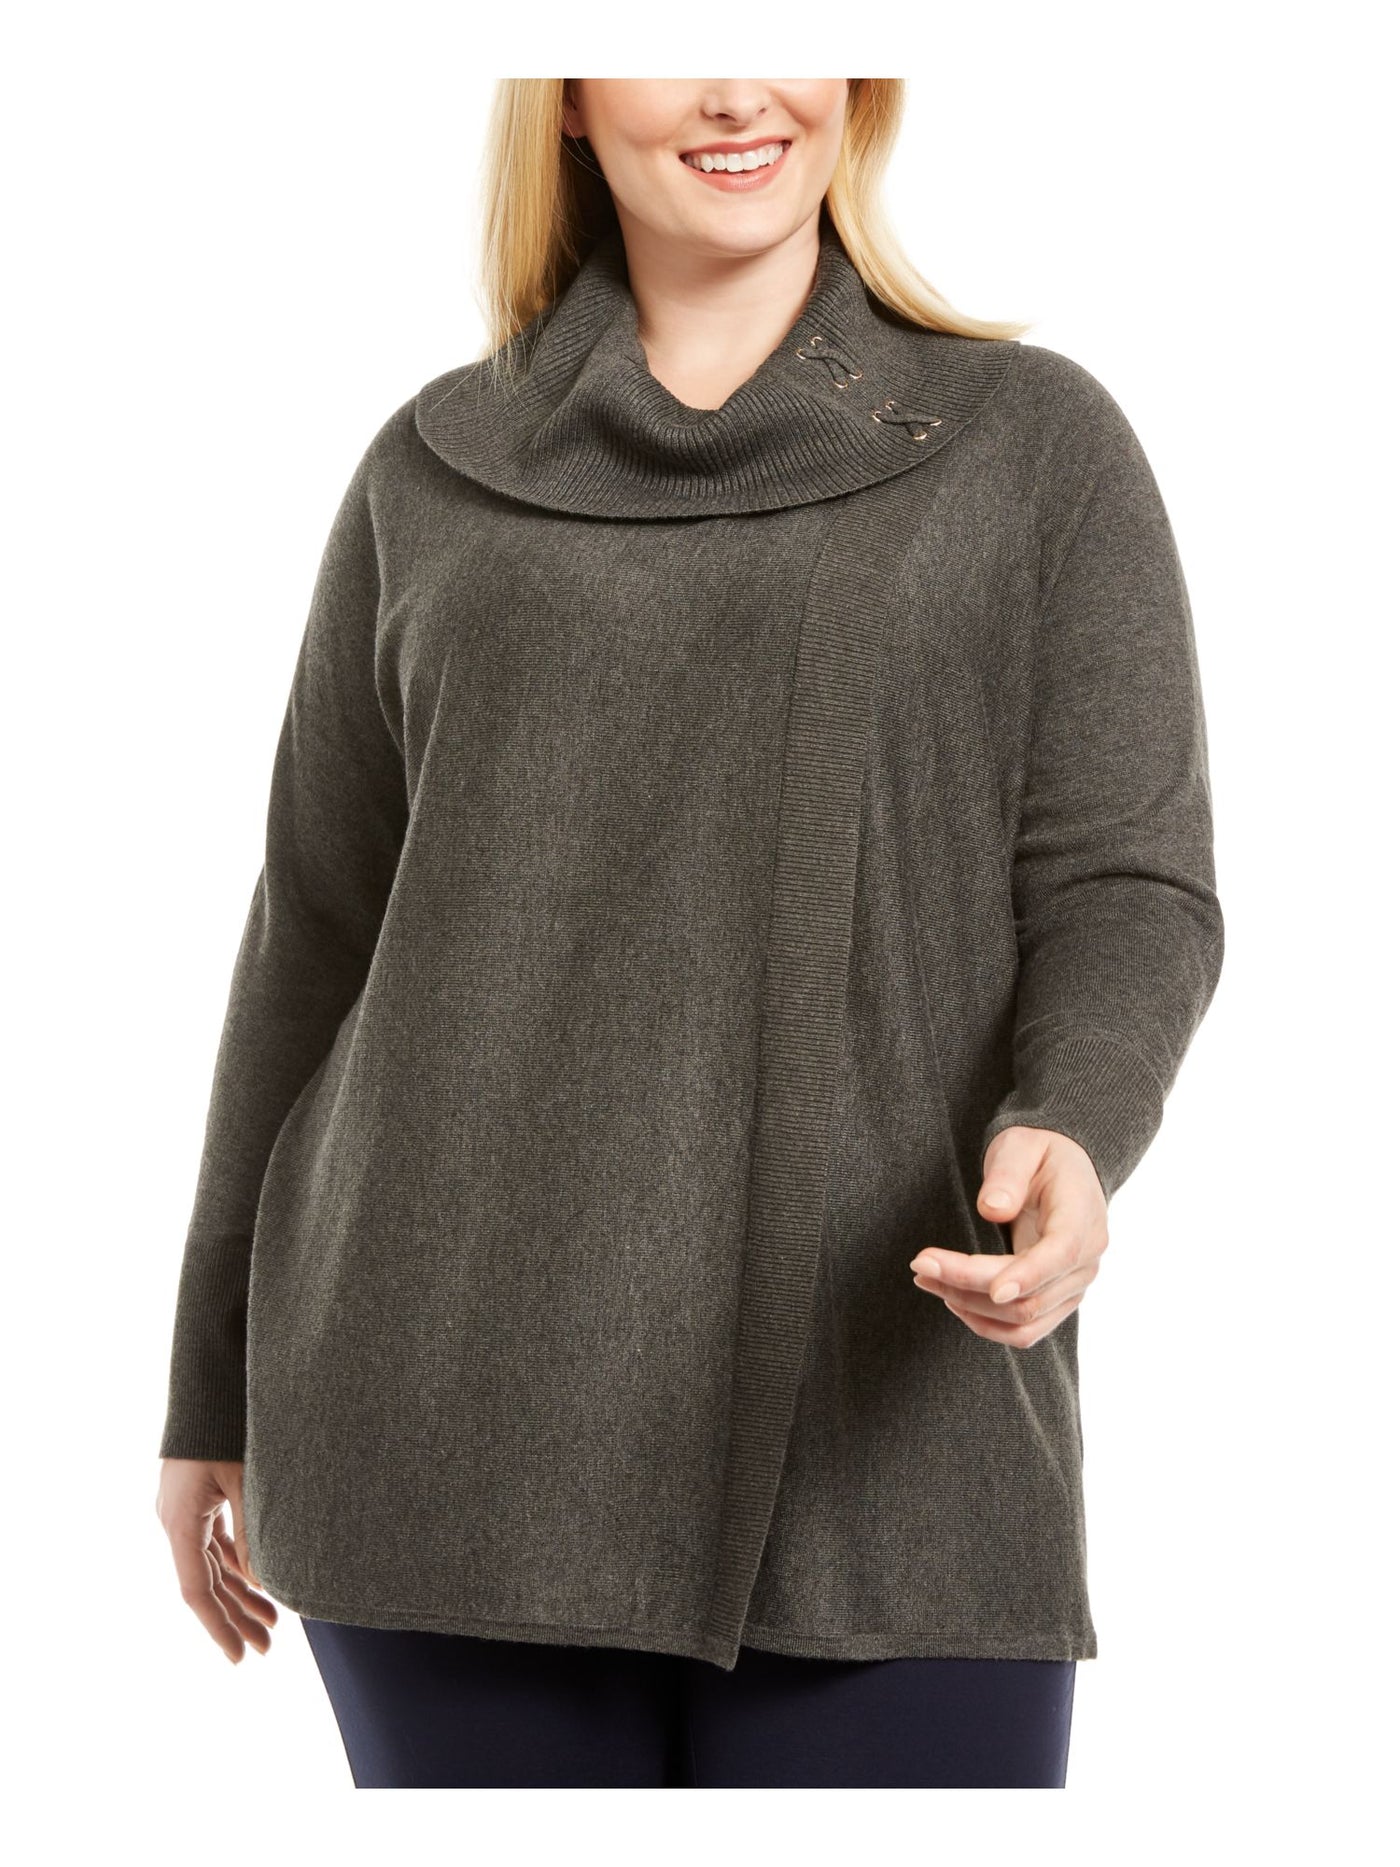 JM COLLECTION Womens Long Sleeve Cowl Neck Sweater